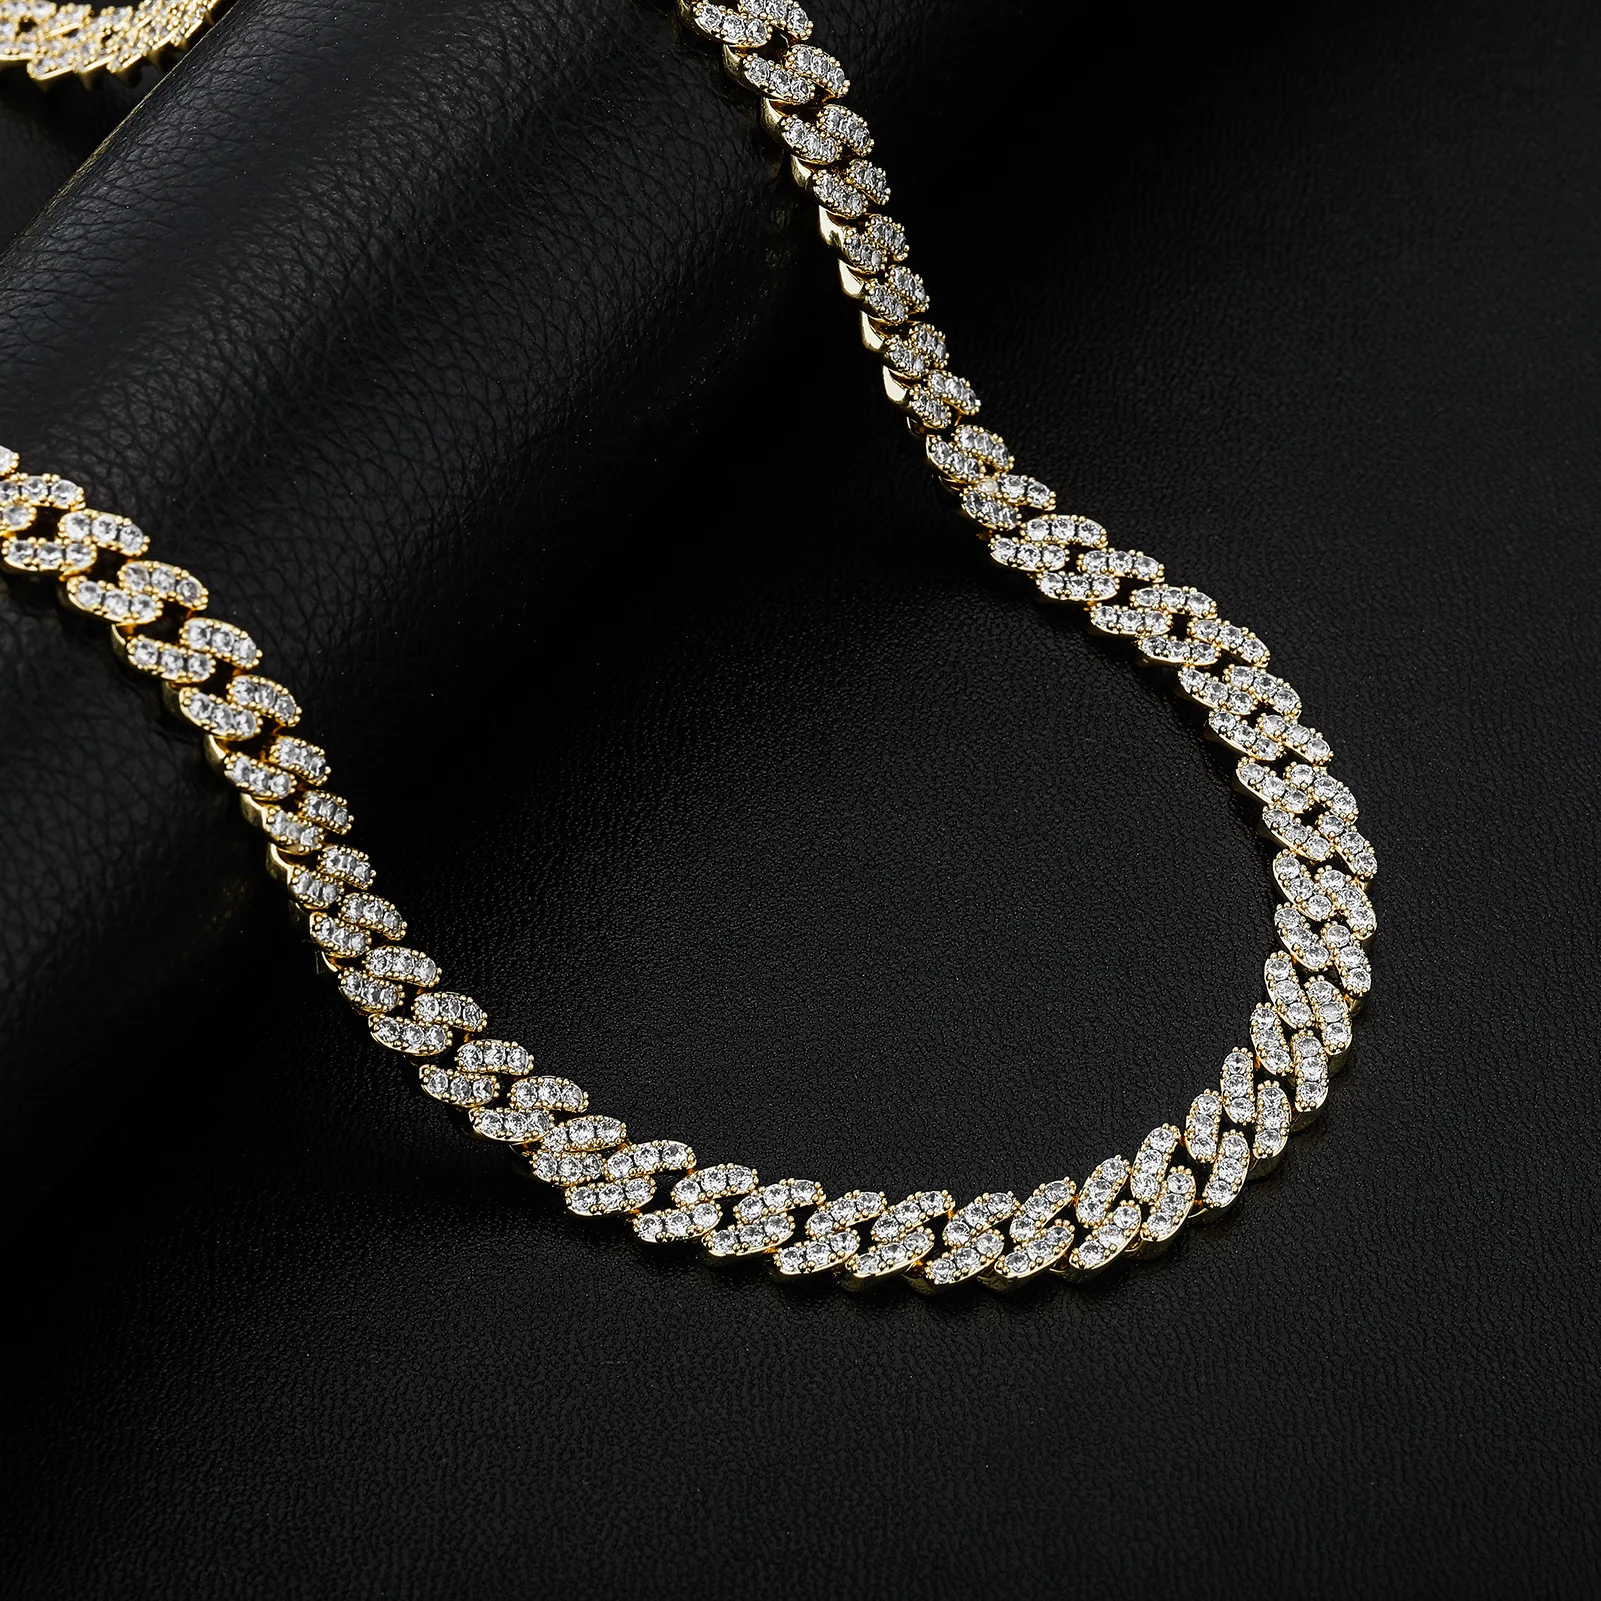 5A zircon brass iced out 9mm cuban link chain hip hop white gold rose gold premium quality spring clasp cuban chain necklace